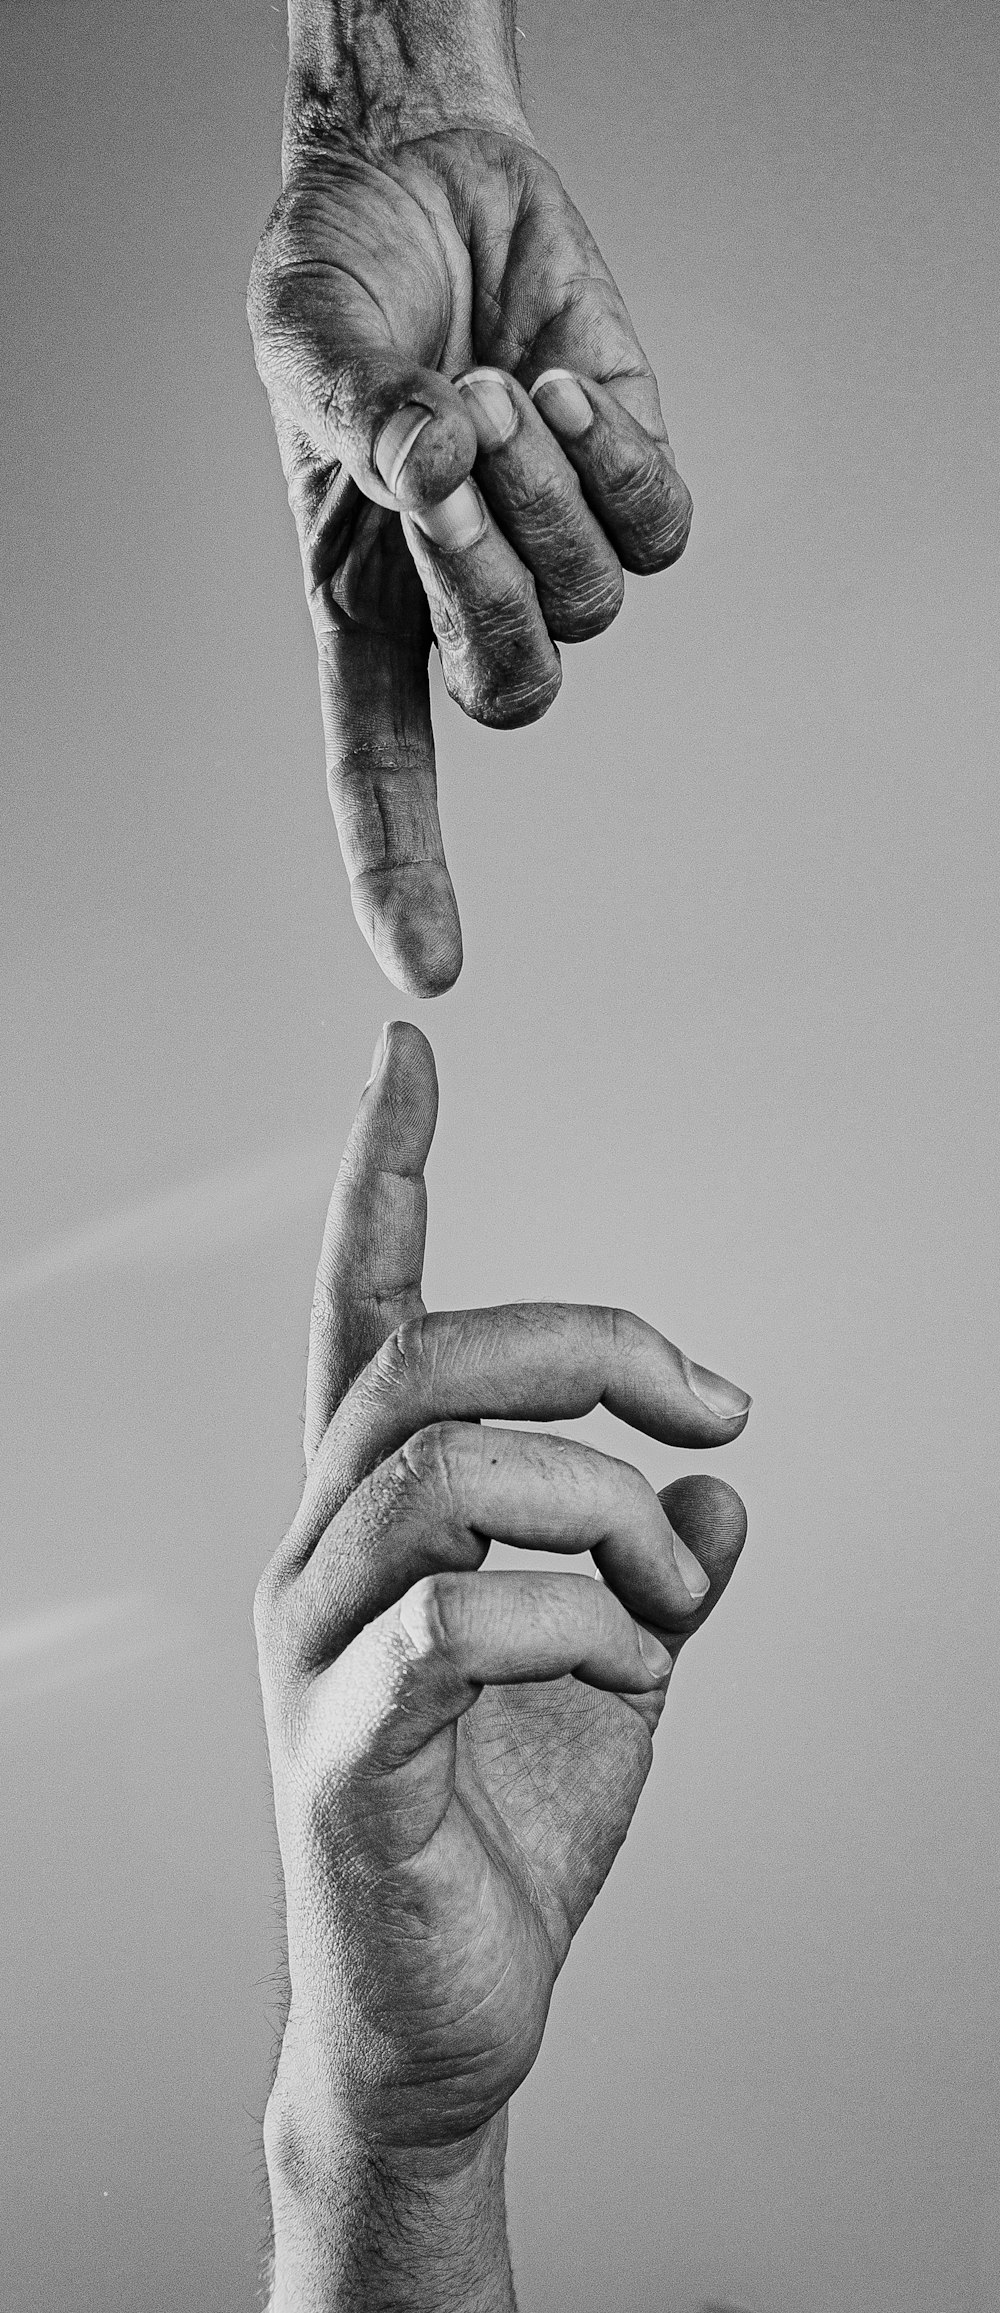 a black and white photo of two hands reaching for each other